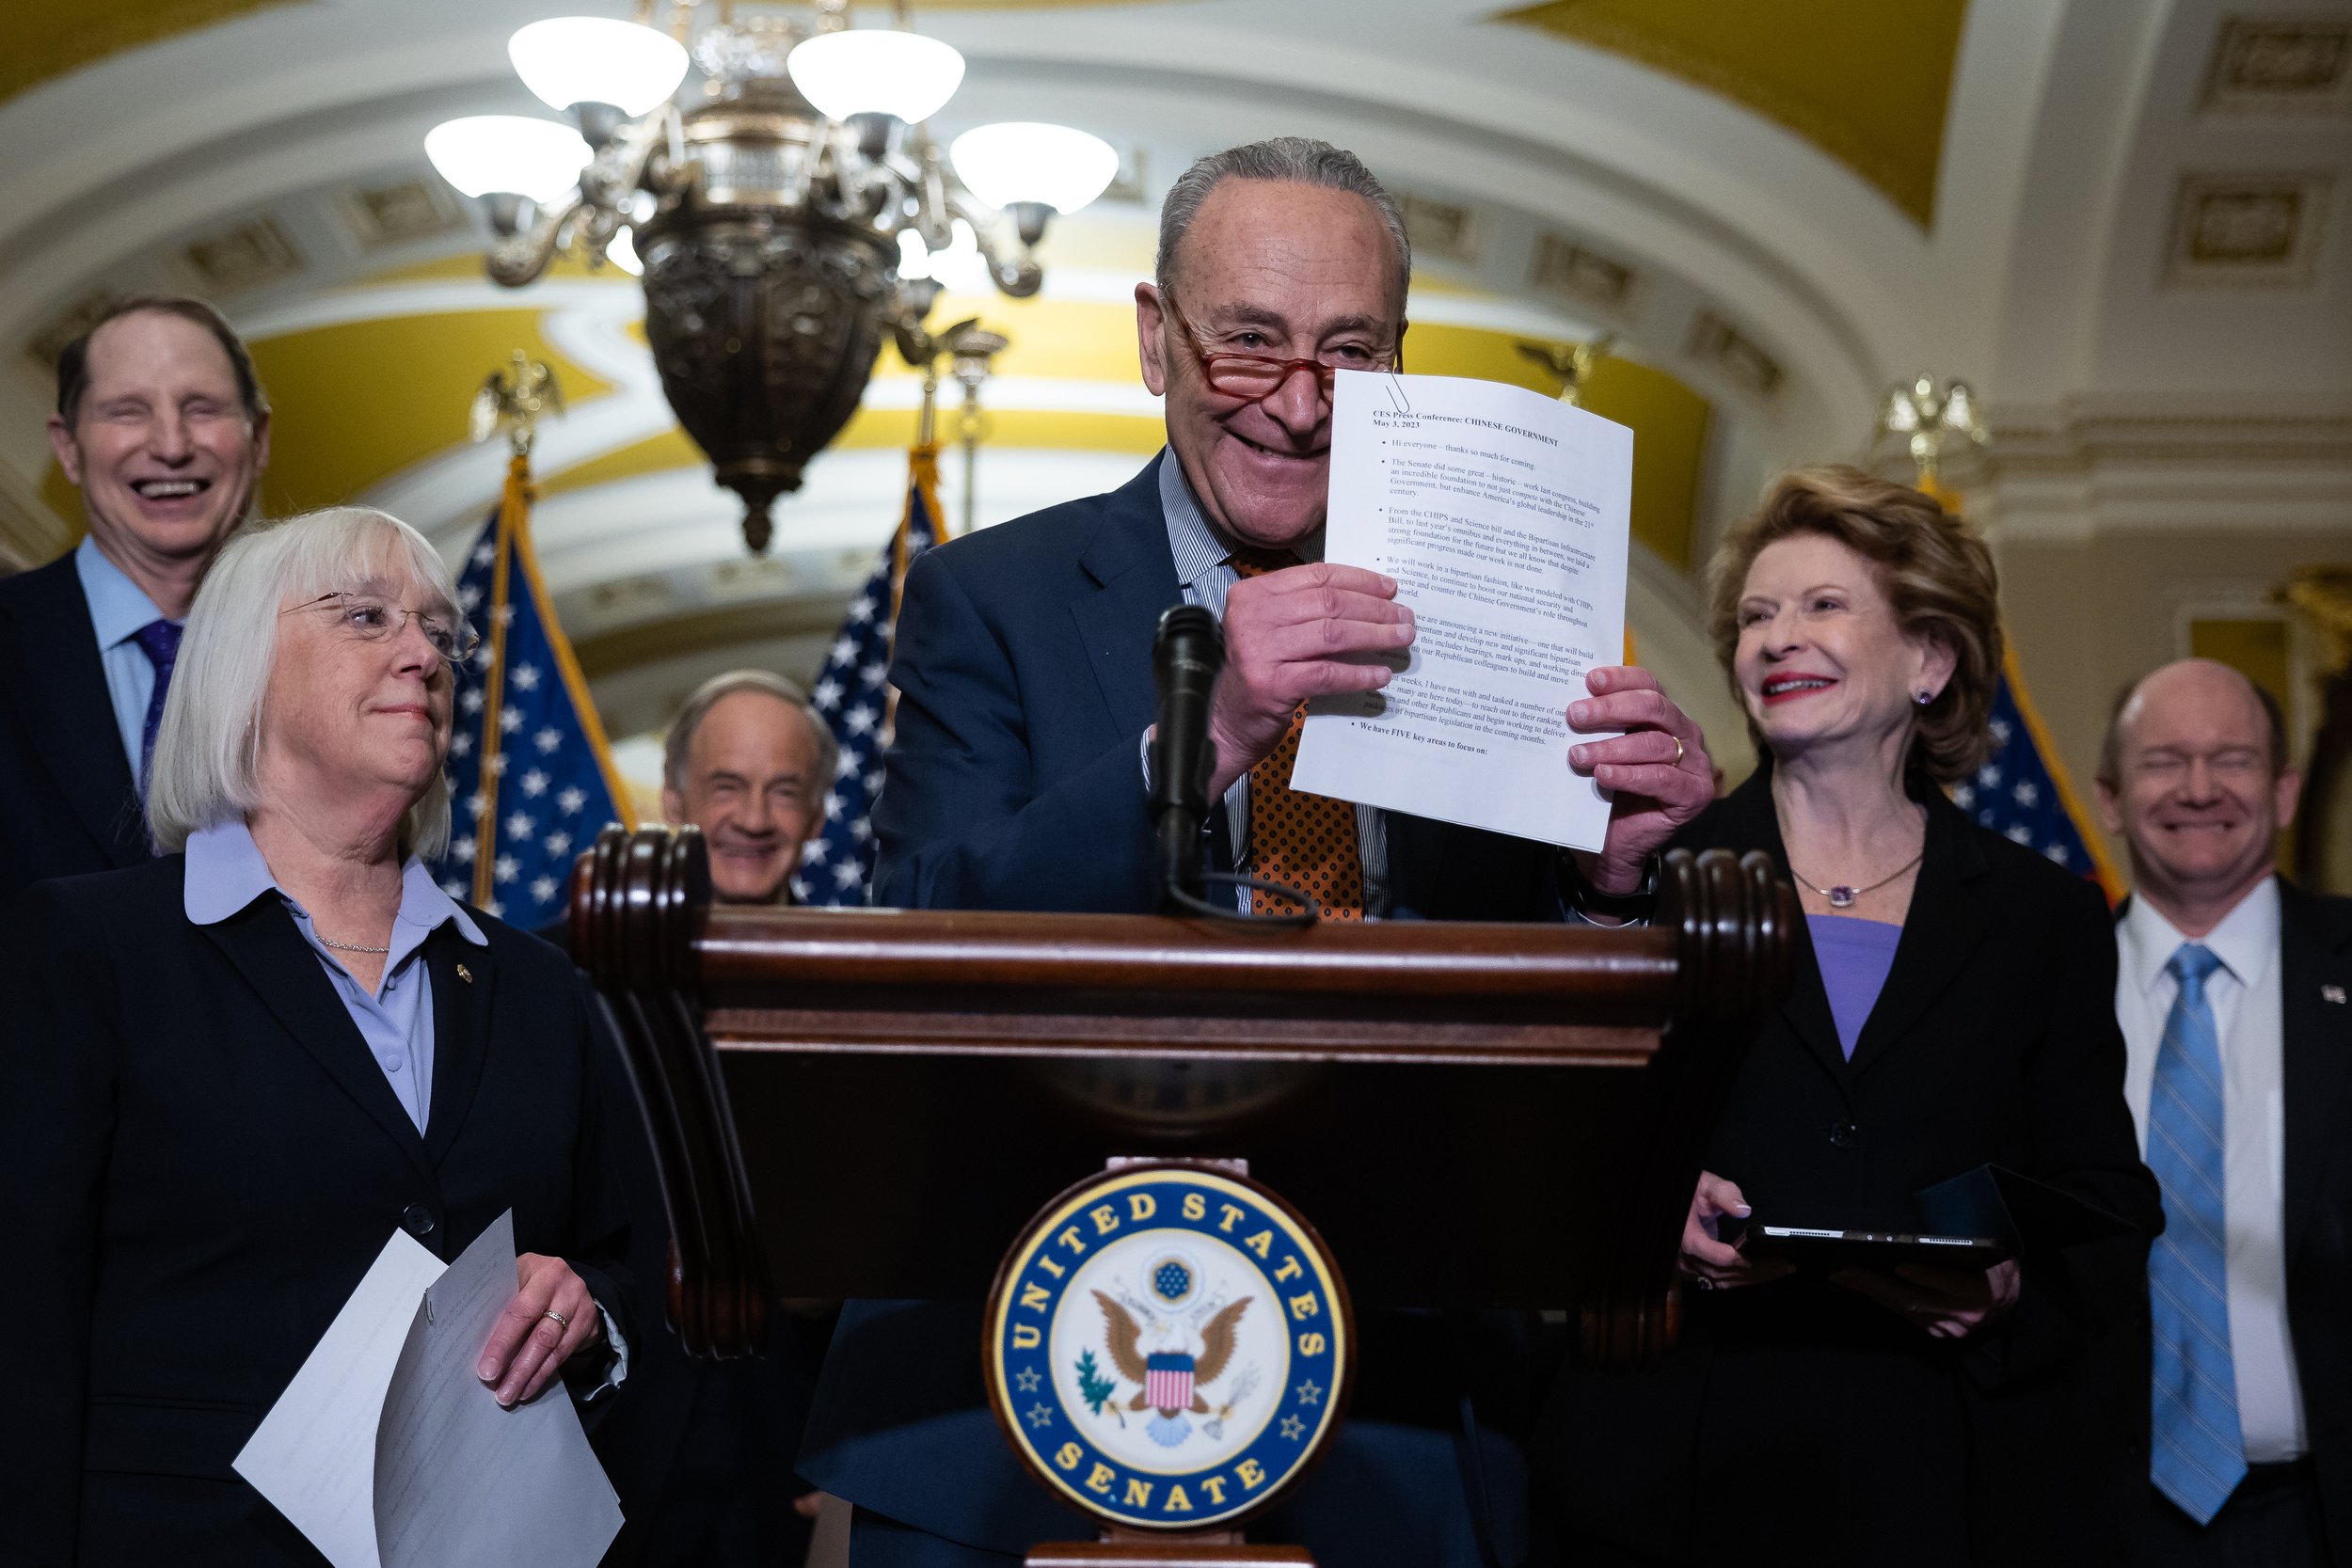  Senate Majority Leader Chuck Schumer (D-N.Y.) jokingly invites journalists to photograph his notes while other Senate Democrats react during a press conference at the U.S. Capitol May 3, 2023. This was an allusion to the photograph I took of his not